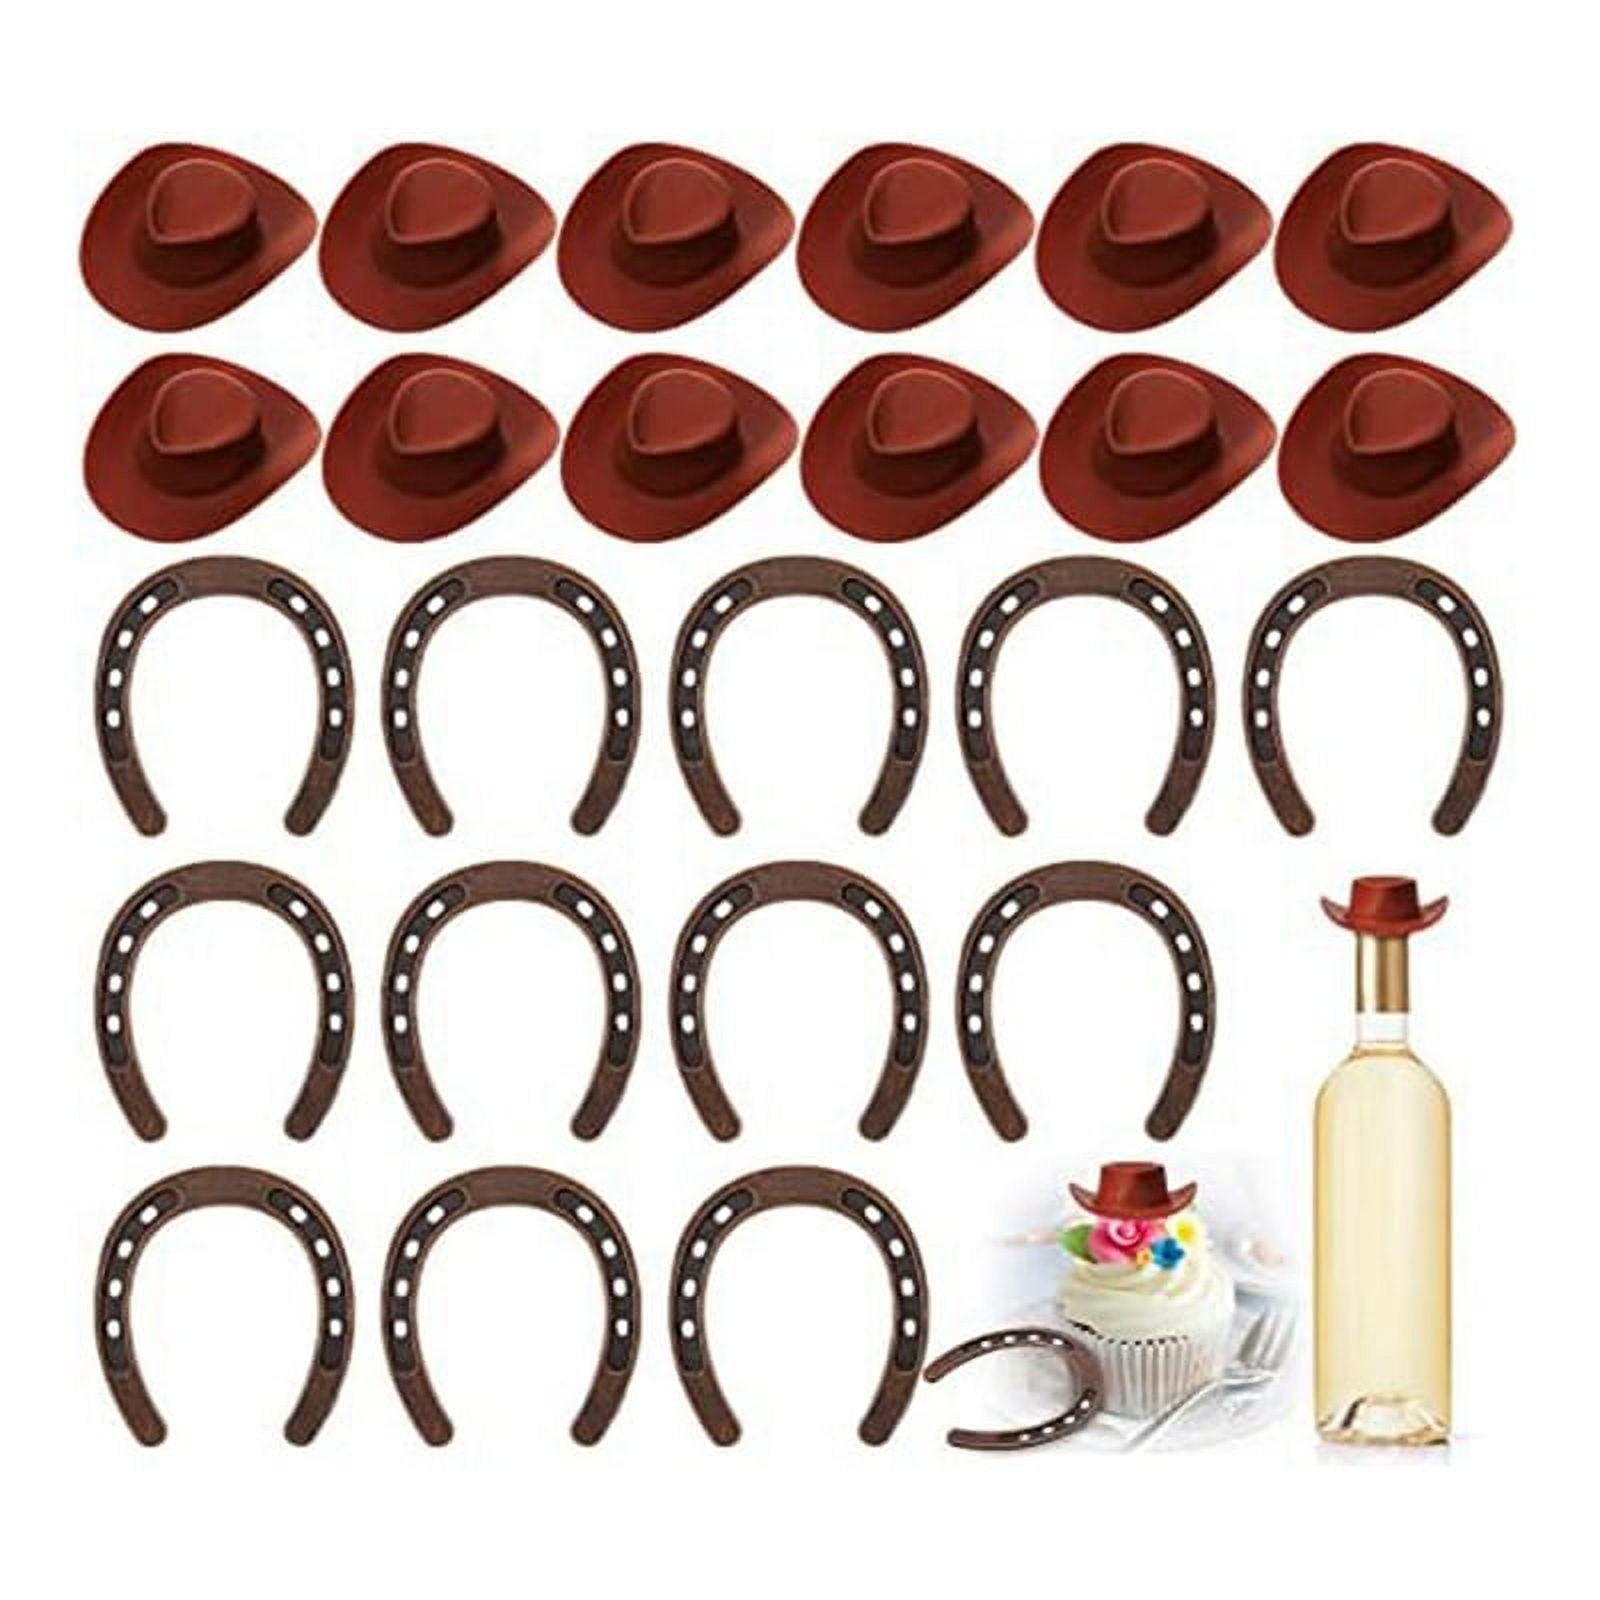 Symkmb 24 Pieces Western Theme Lucky Horseshoe Ornament and Mini Hat Crafts  Miniature Horse Shoes Wedding 